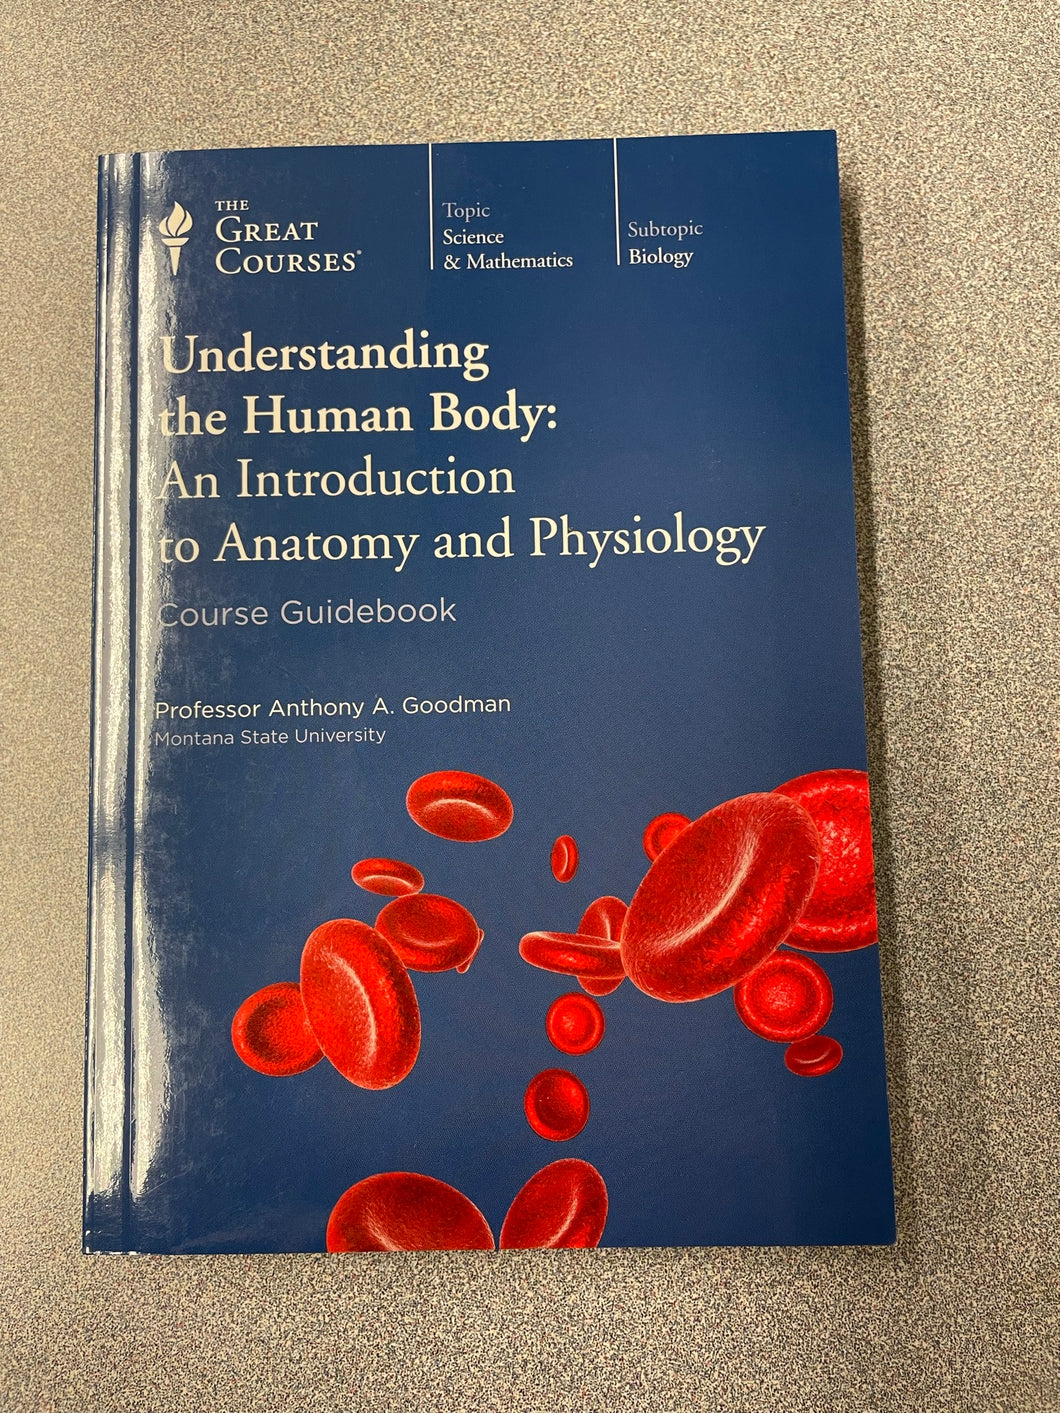 Understanding the Human Body: An Introduction to Anatomy and Physiology Course Guidebook, Goodman, Anthony A. [2004] GC 12/22